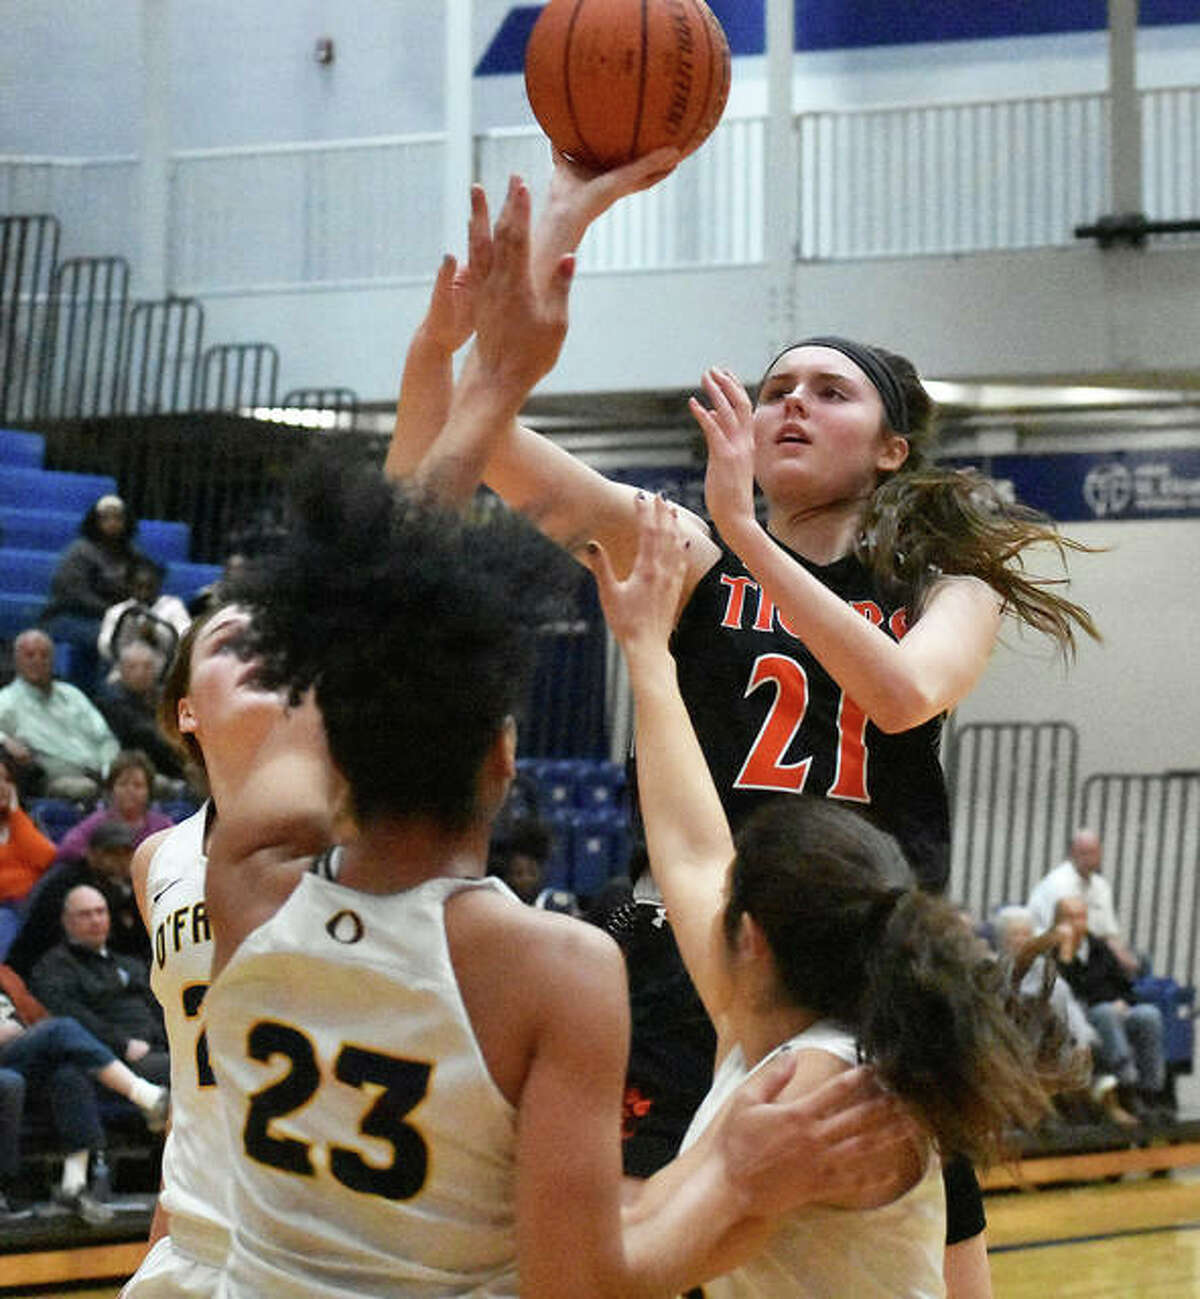 Edwardsville sophomore forward Elle Evans puts up a runner in the lane during the first half against O’Fallon.